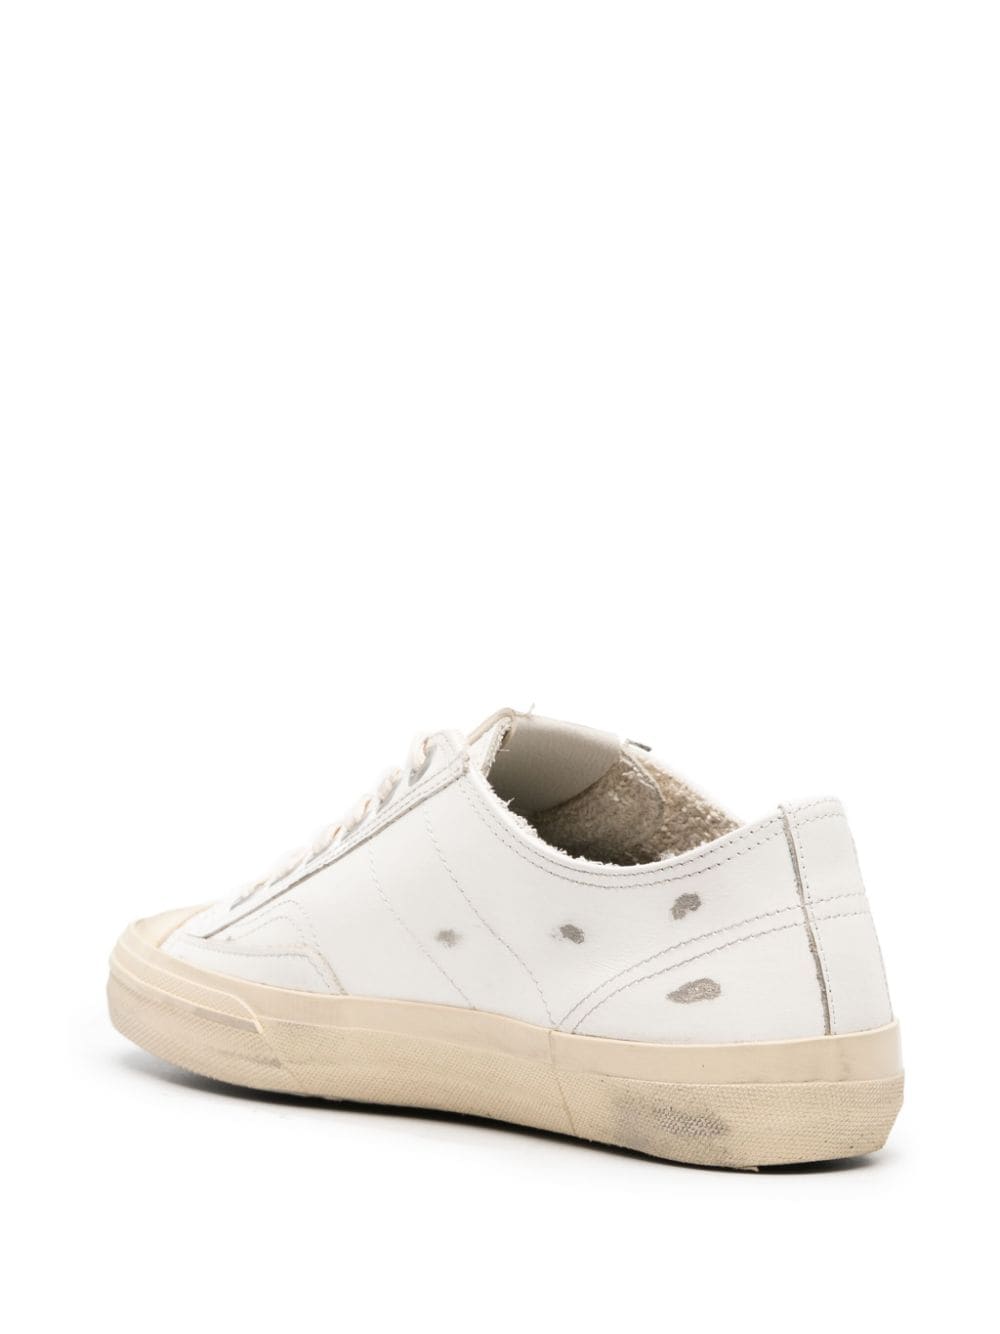 V-Star 2 distressed sneakers